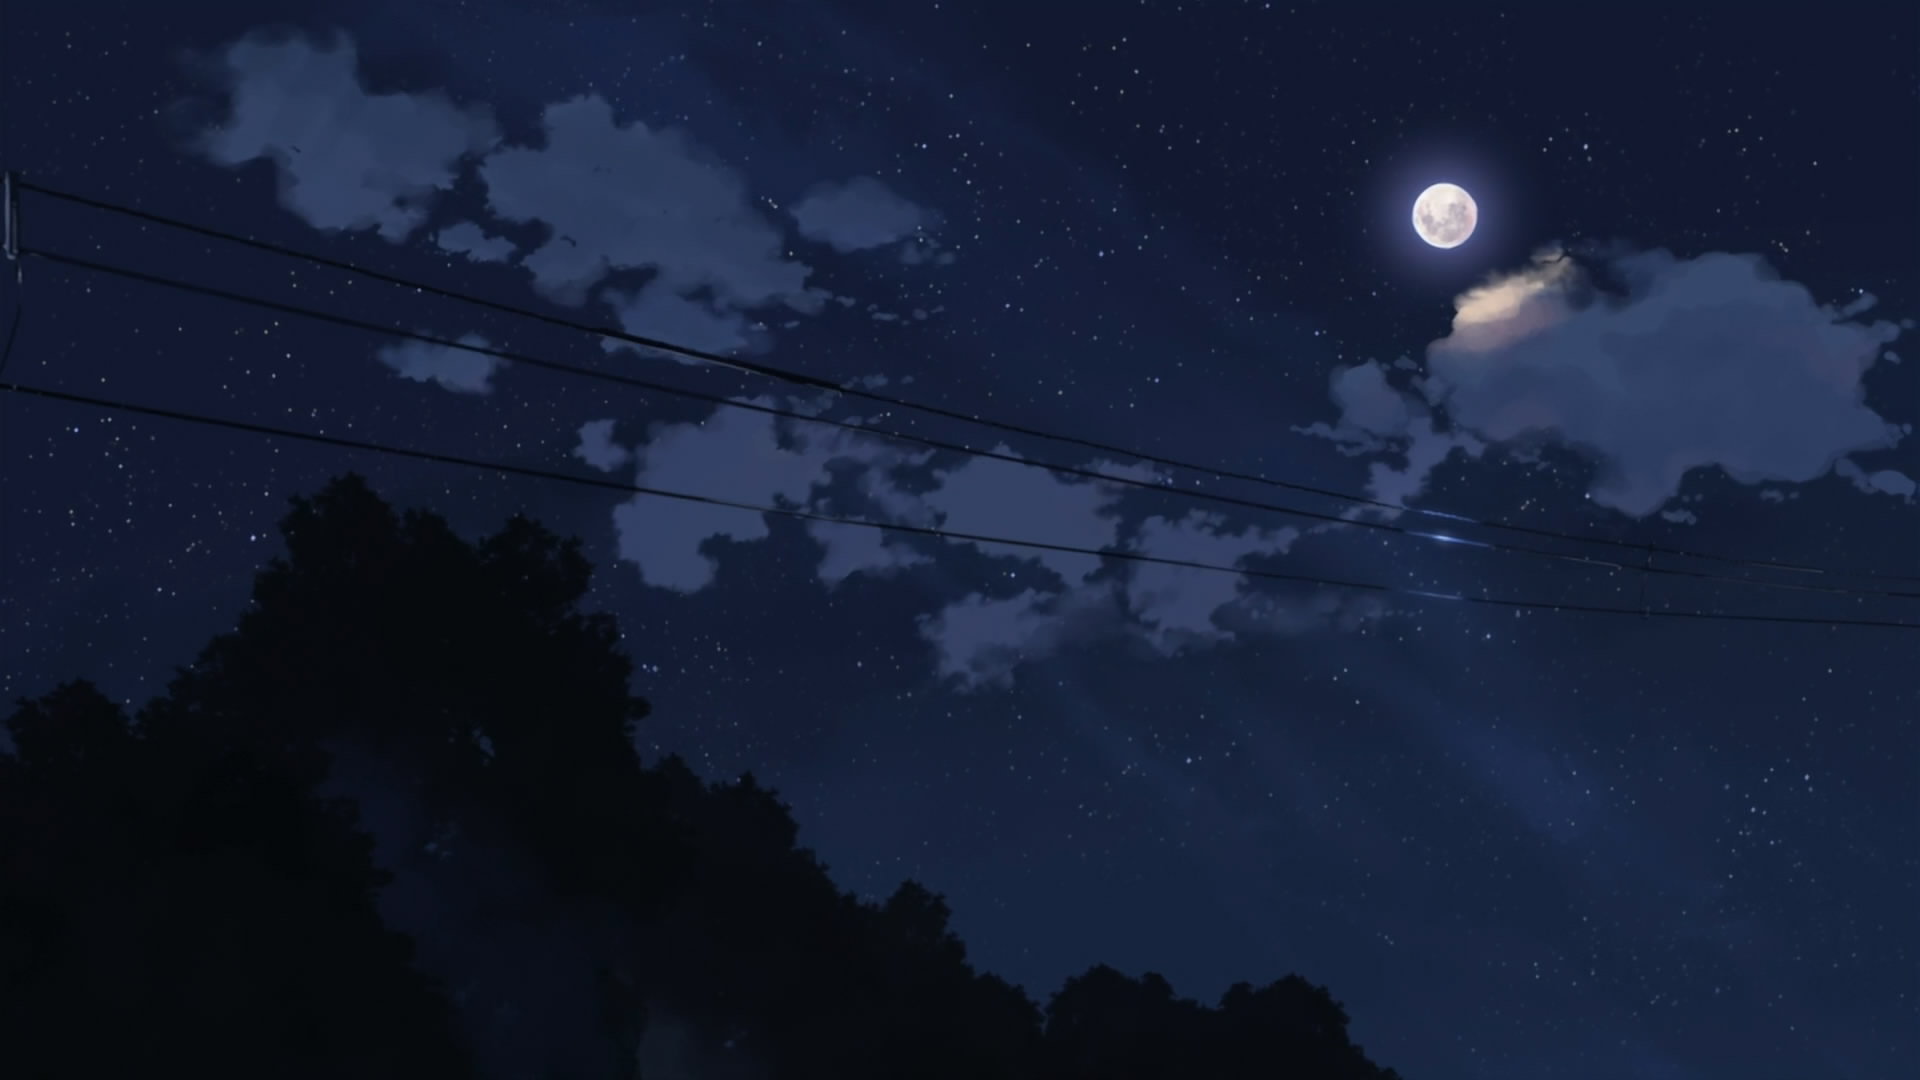 HD desktop wallpaper Anime Night Moon Lake Reflection Starry Sky  Factory download free picture 1372389